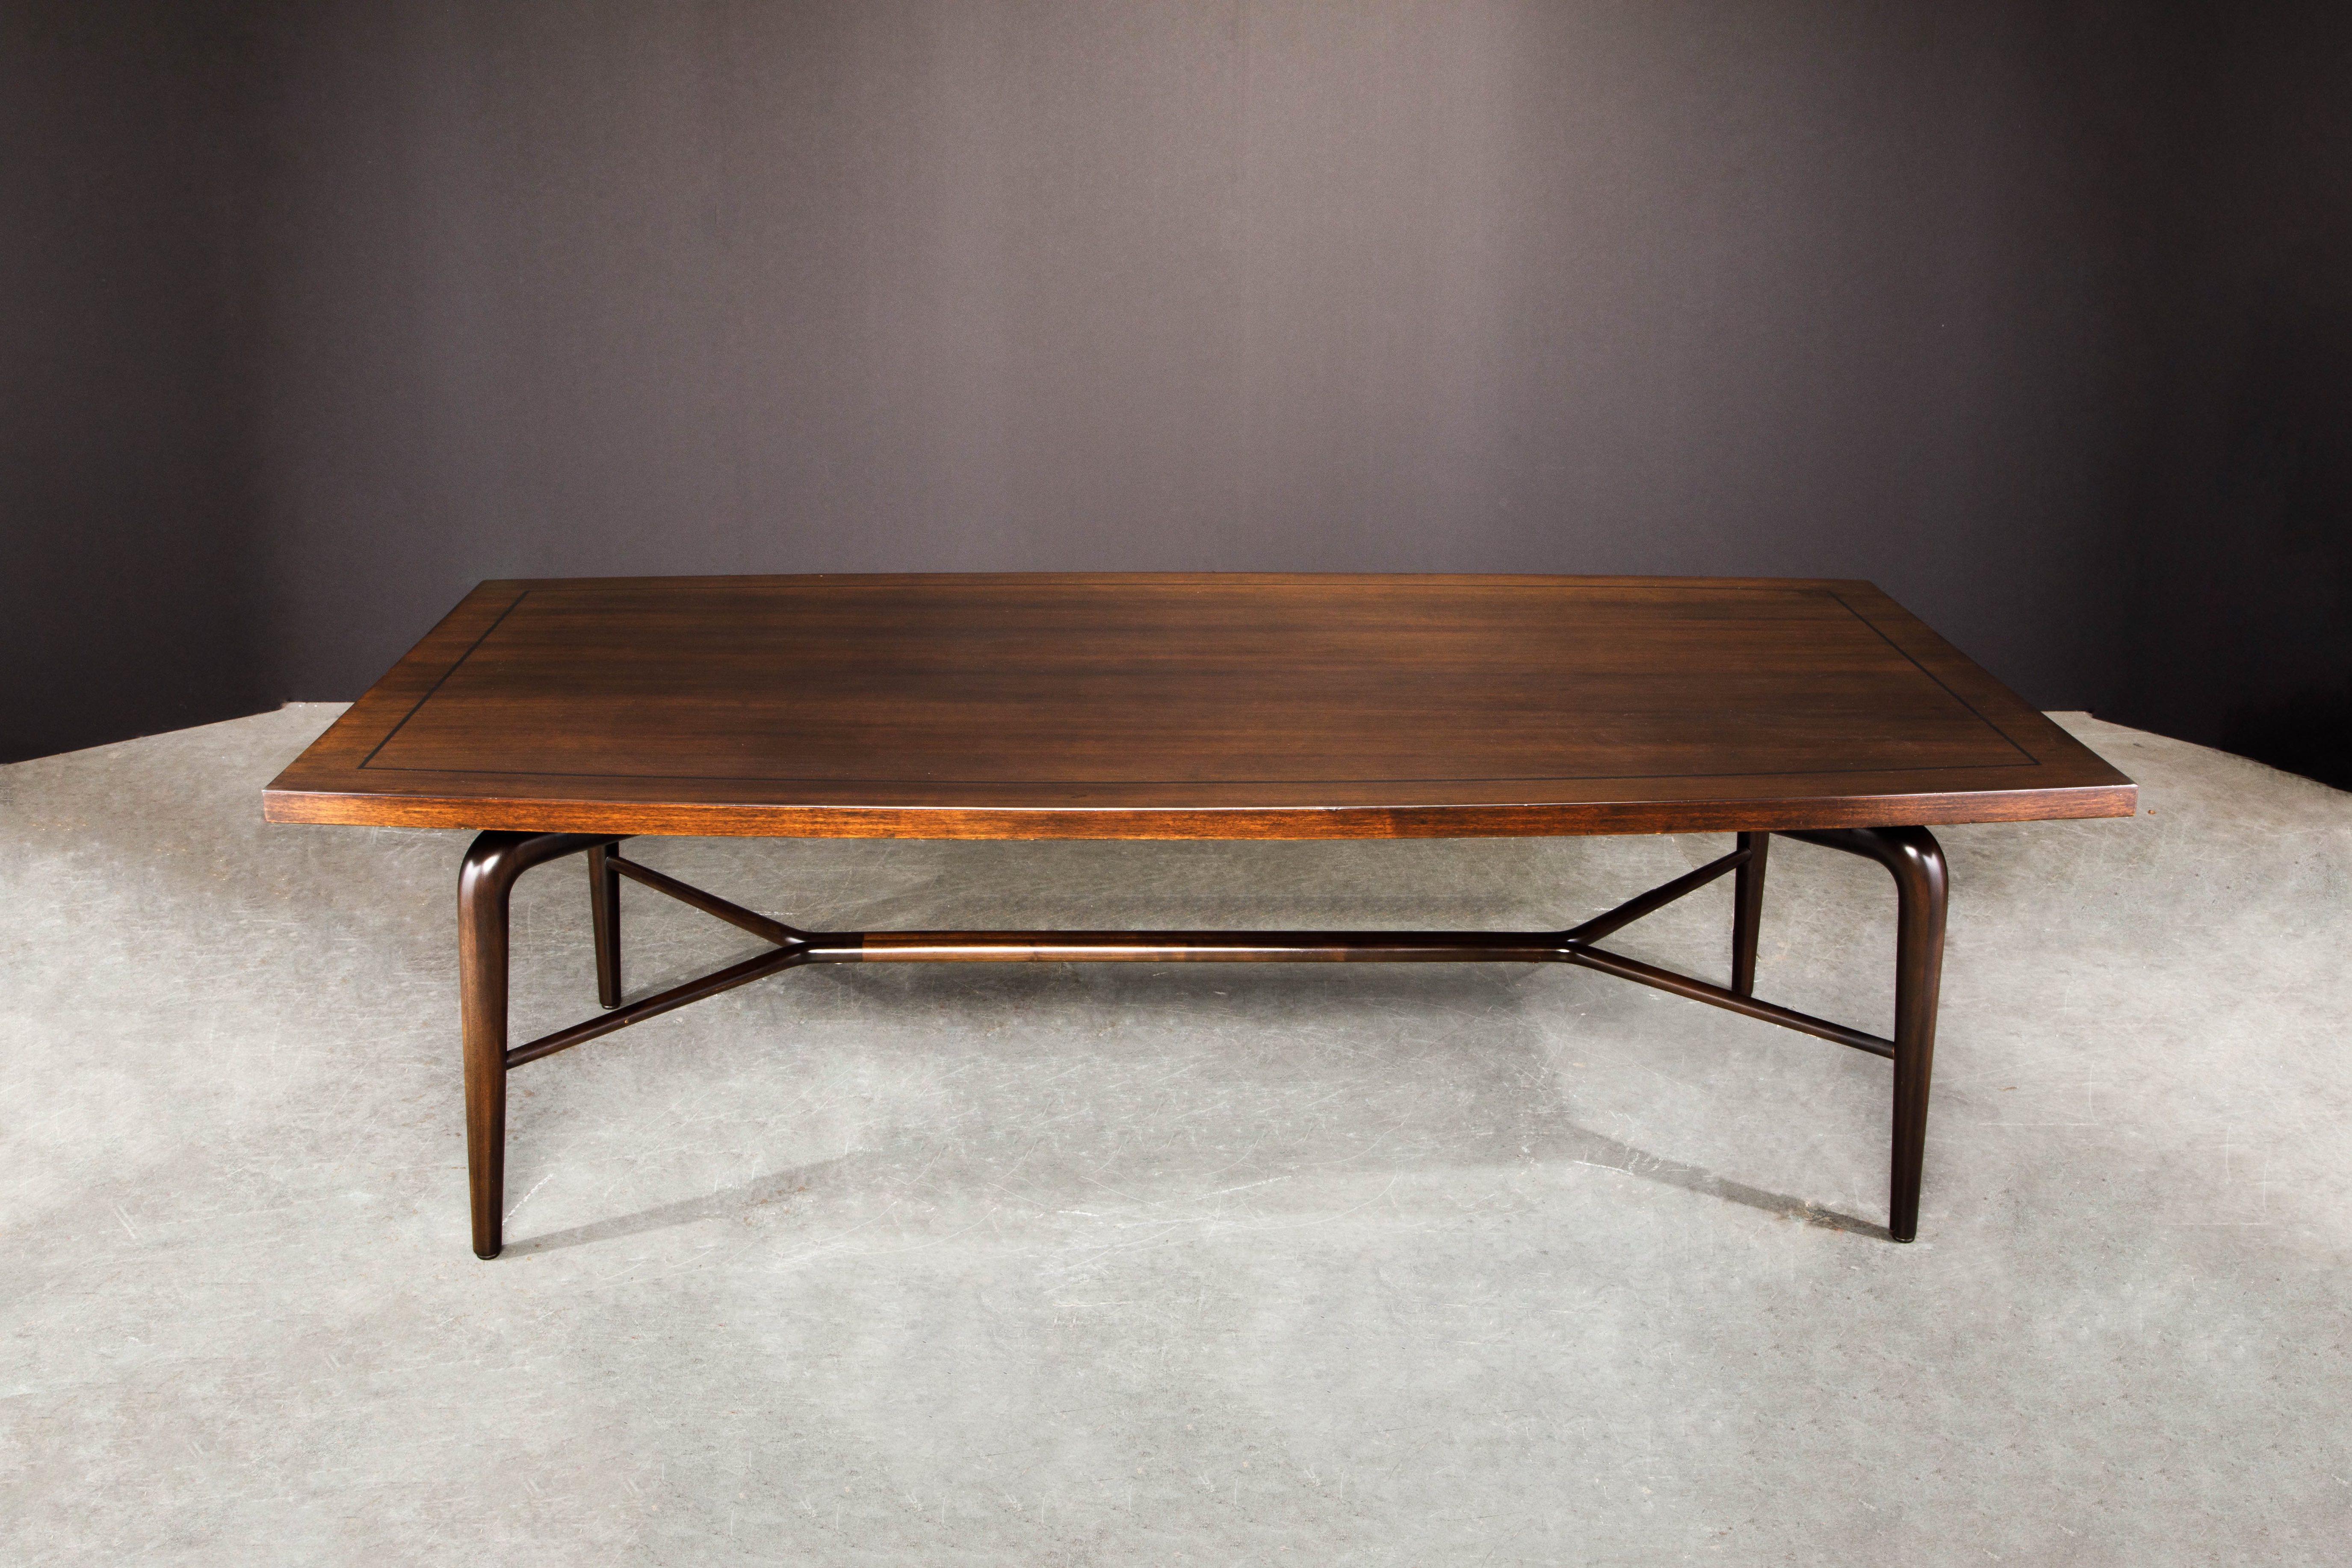 This large sculptural dining table by Maurice Bailey for Monteverdi-Young was crafted from Mahogany with ebony inlay and nicely finished in a satin-gloss lacquer. The base to this table is simply incredible - note the finely sculpted legs and